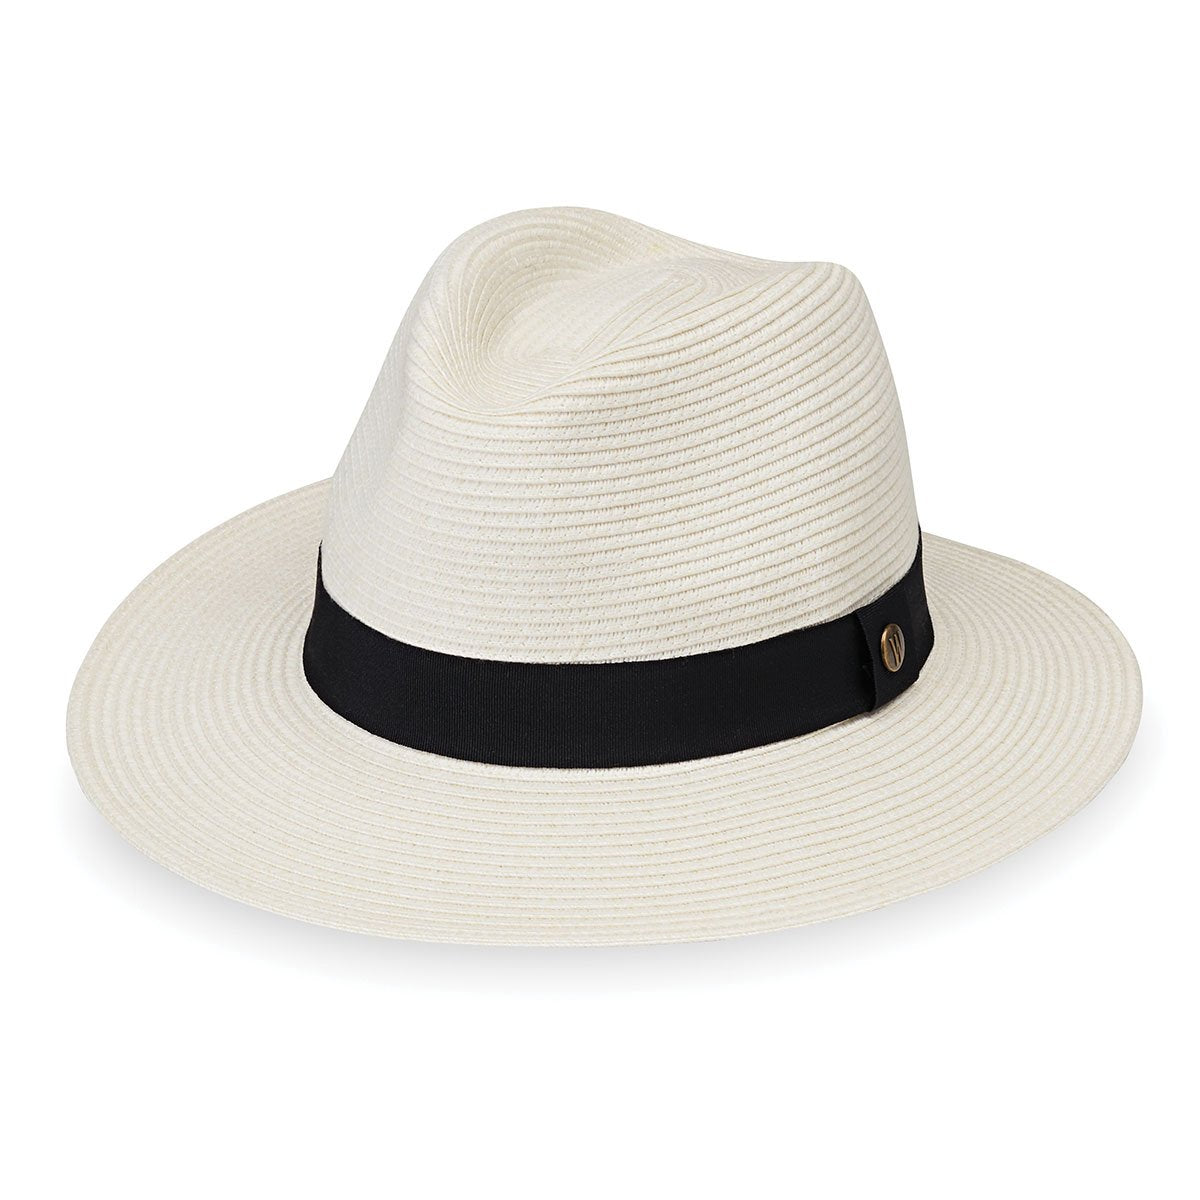 Featuring Front of Packable Unisex Fedora Style Outback UPF Sun Hat in Natural from Wallaroo